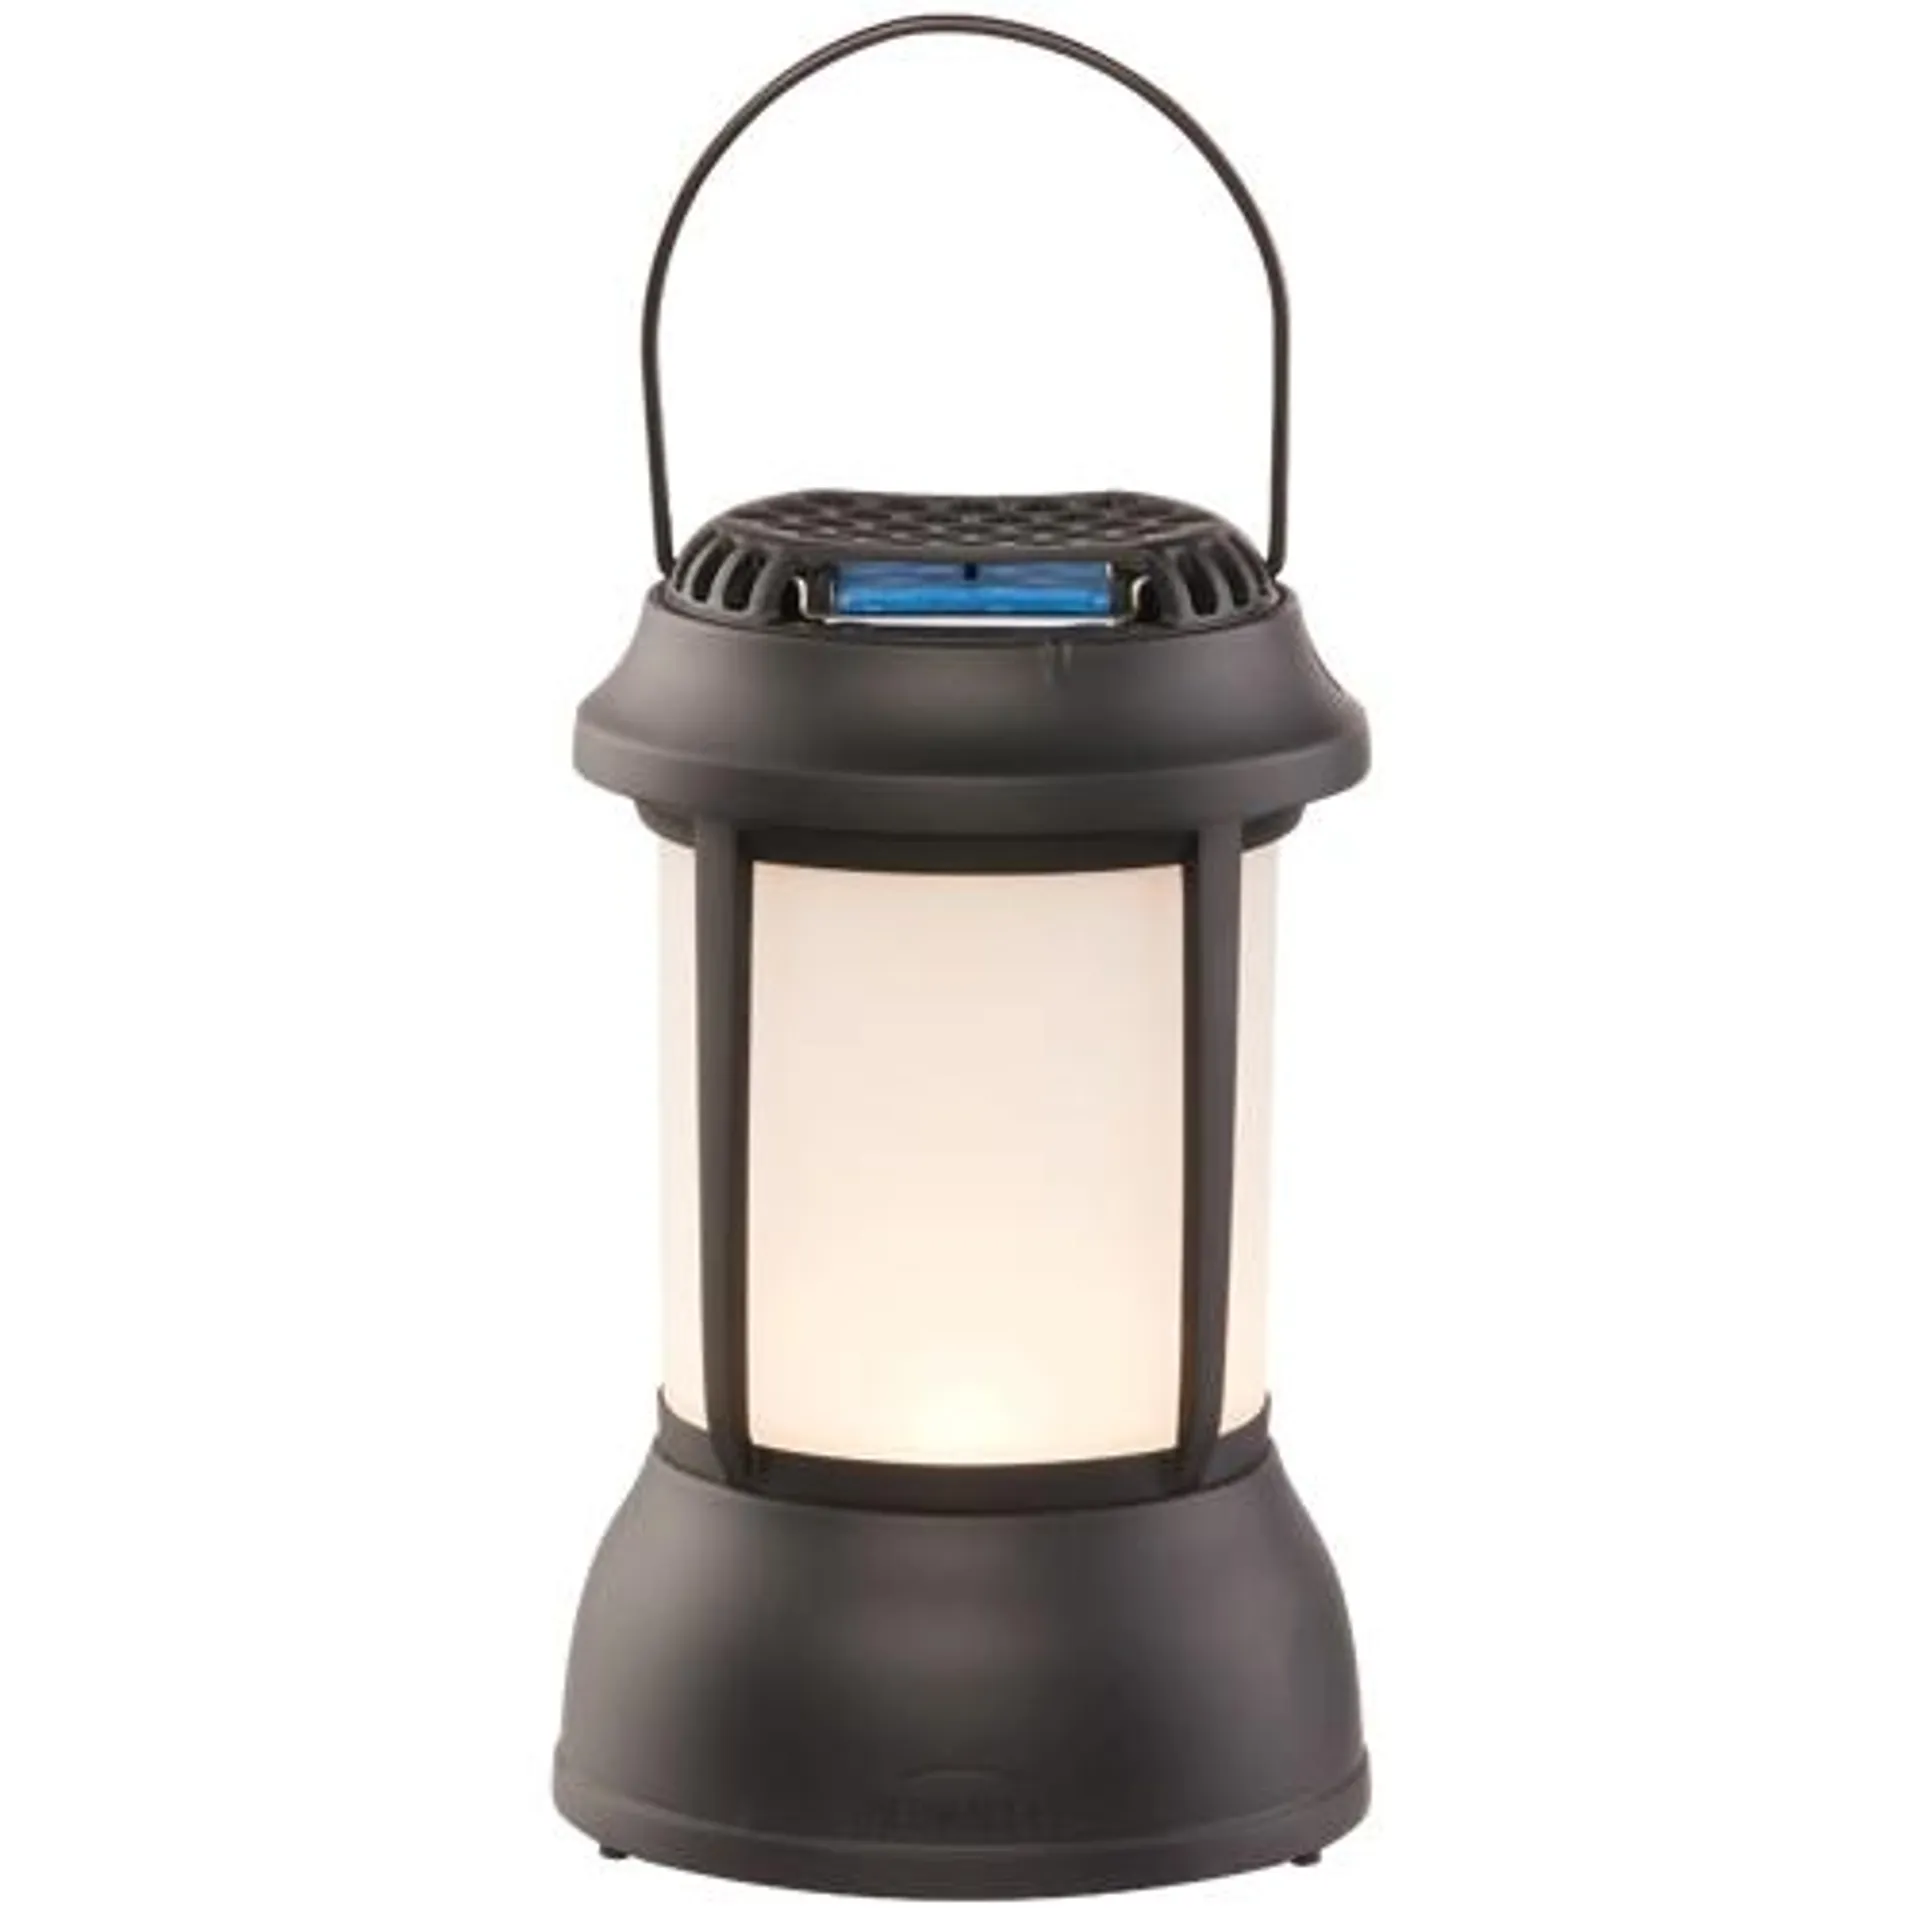 Thermacell Bristol Lantern & Repeller